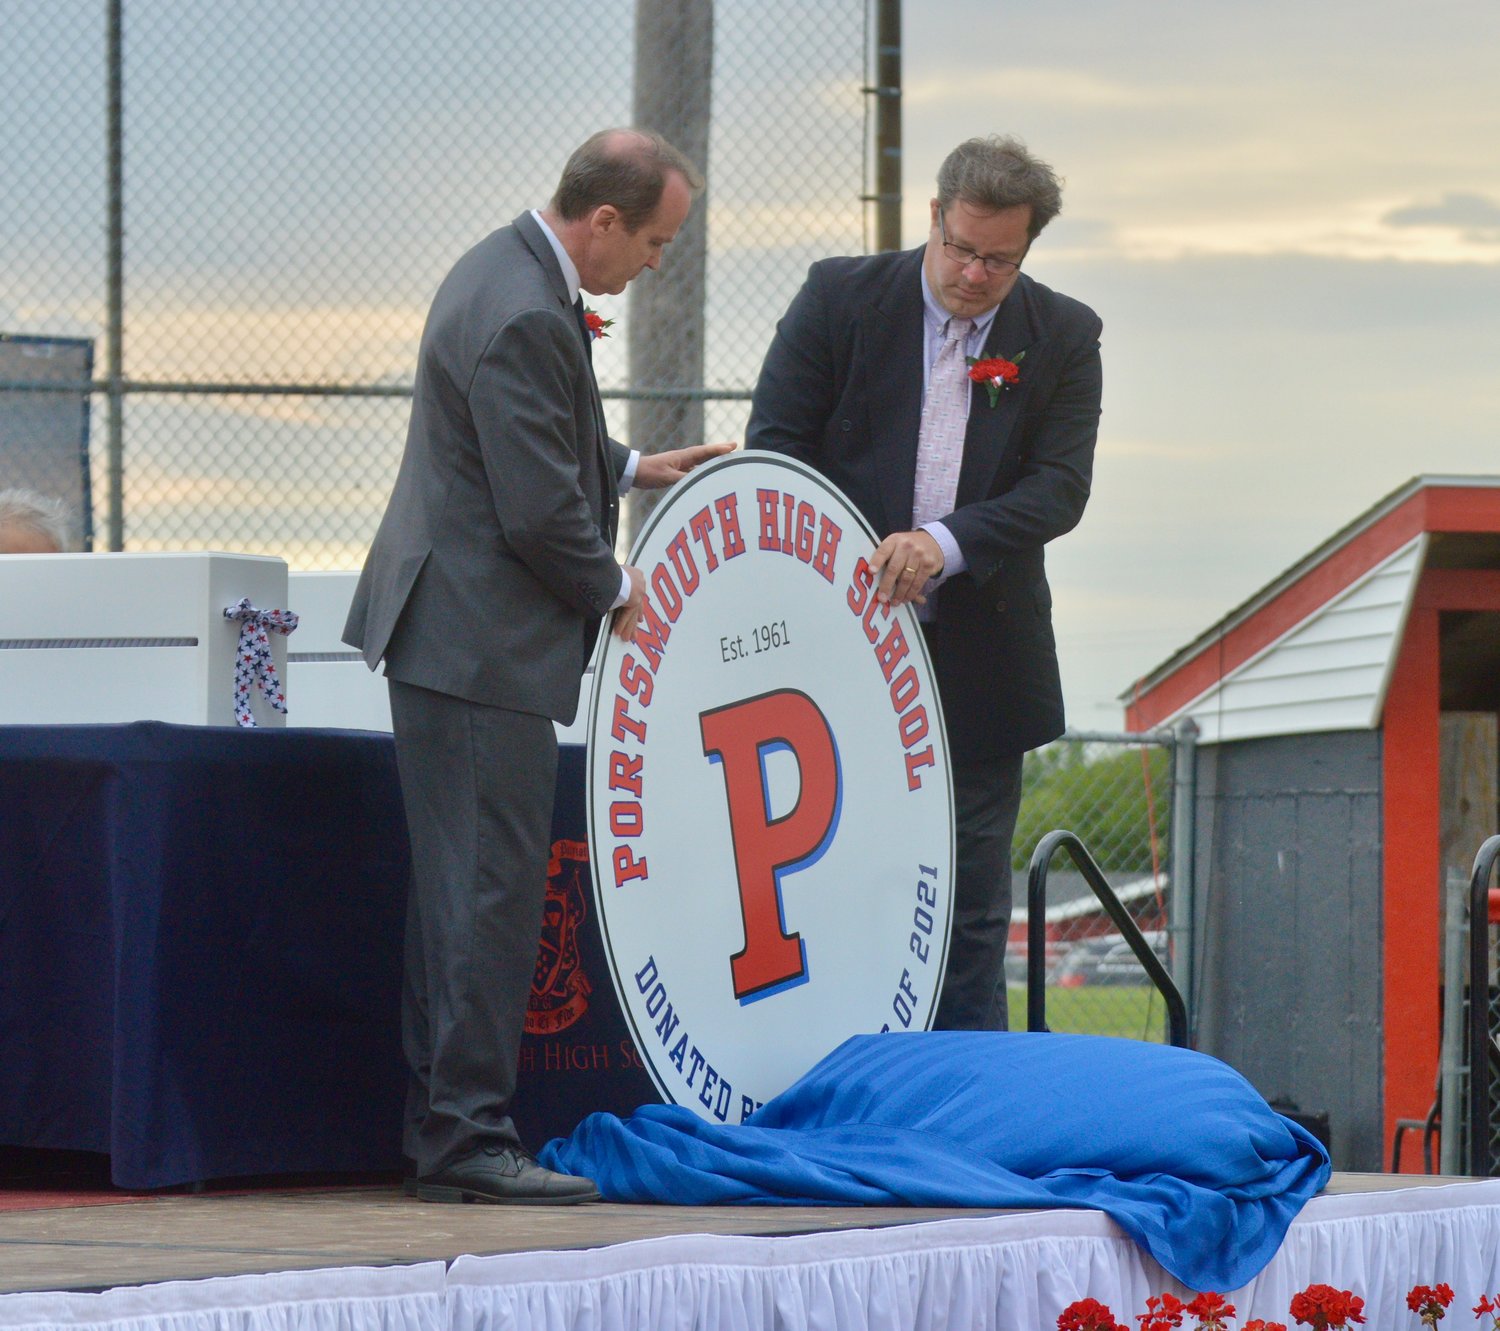 The new Portsmouth High School Patriot Crest, a gift from the Class of 2021, is unveiled.